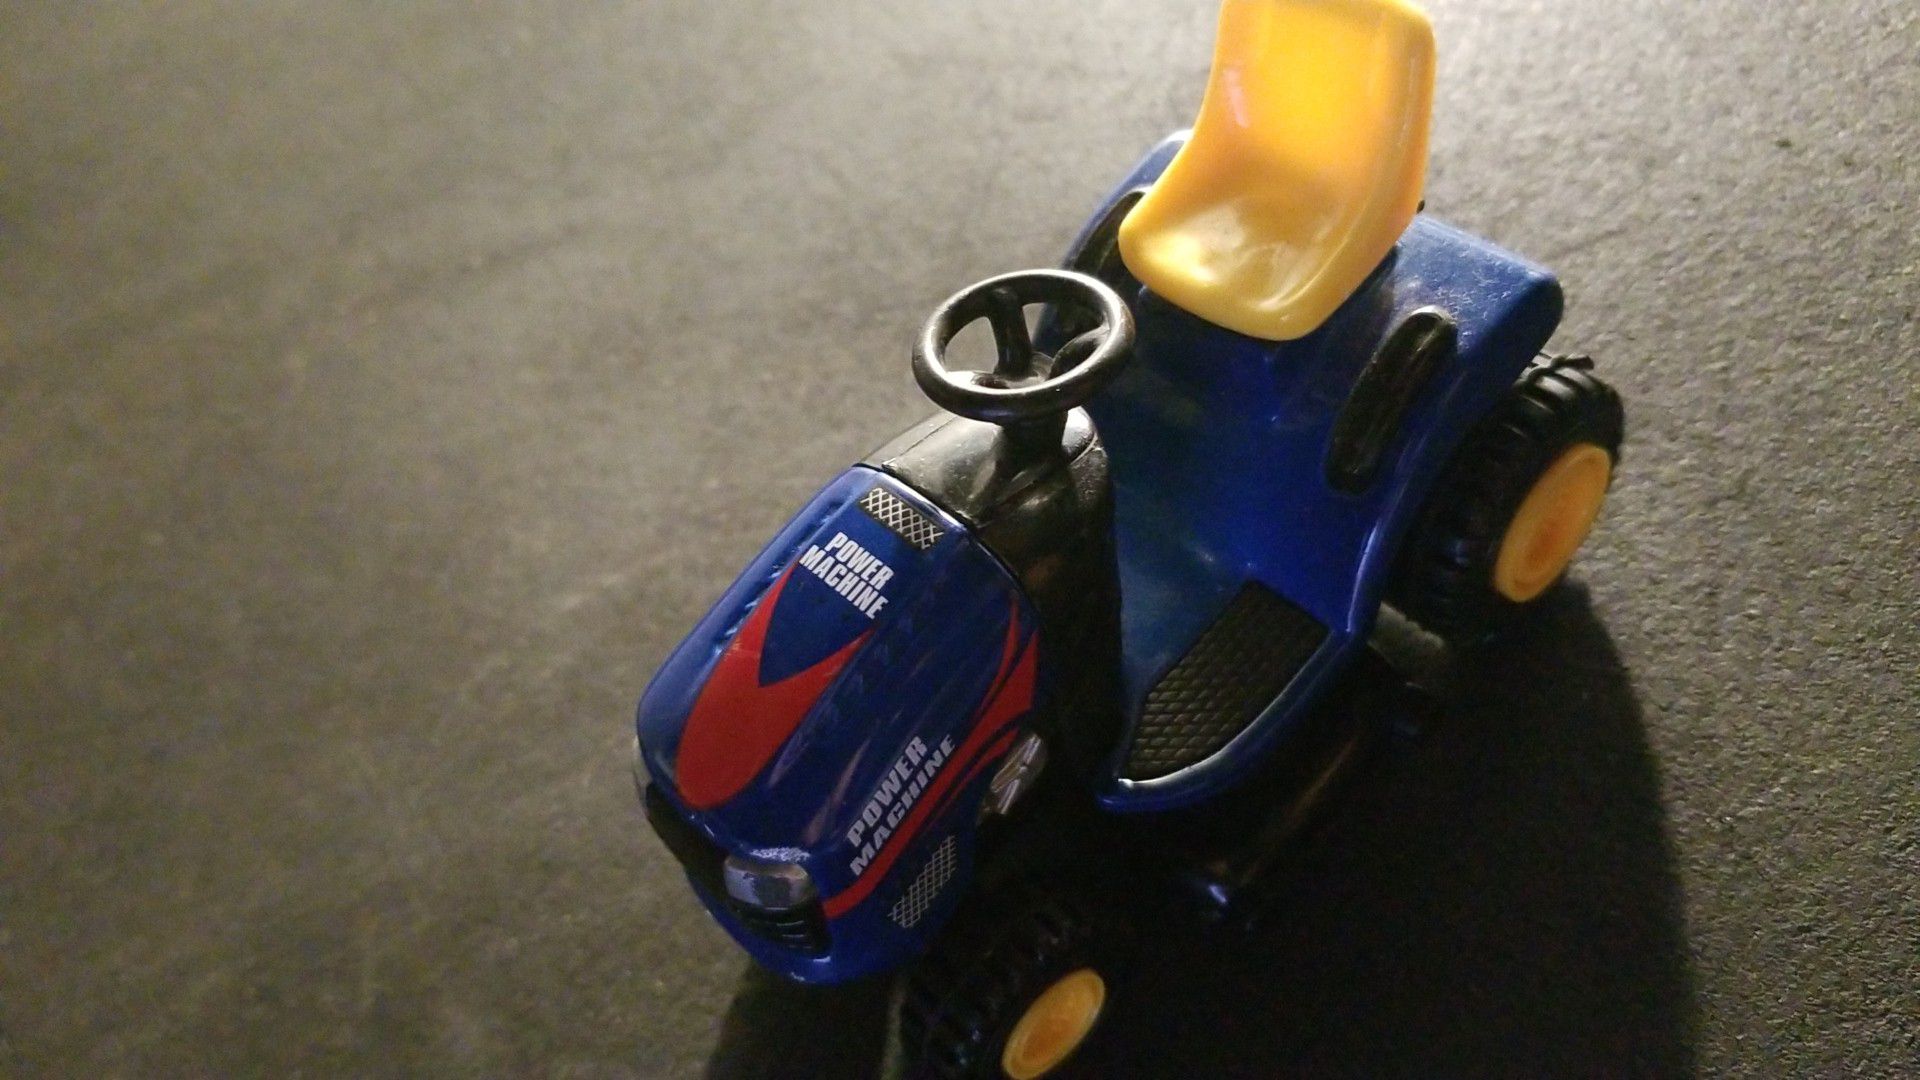 Lawn mower. Hand toy. 6 inches in length